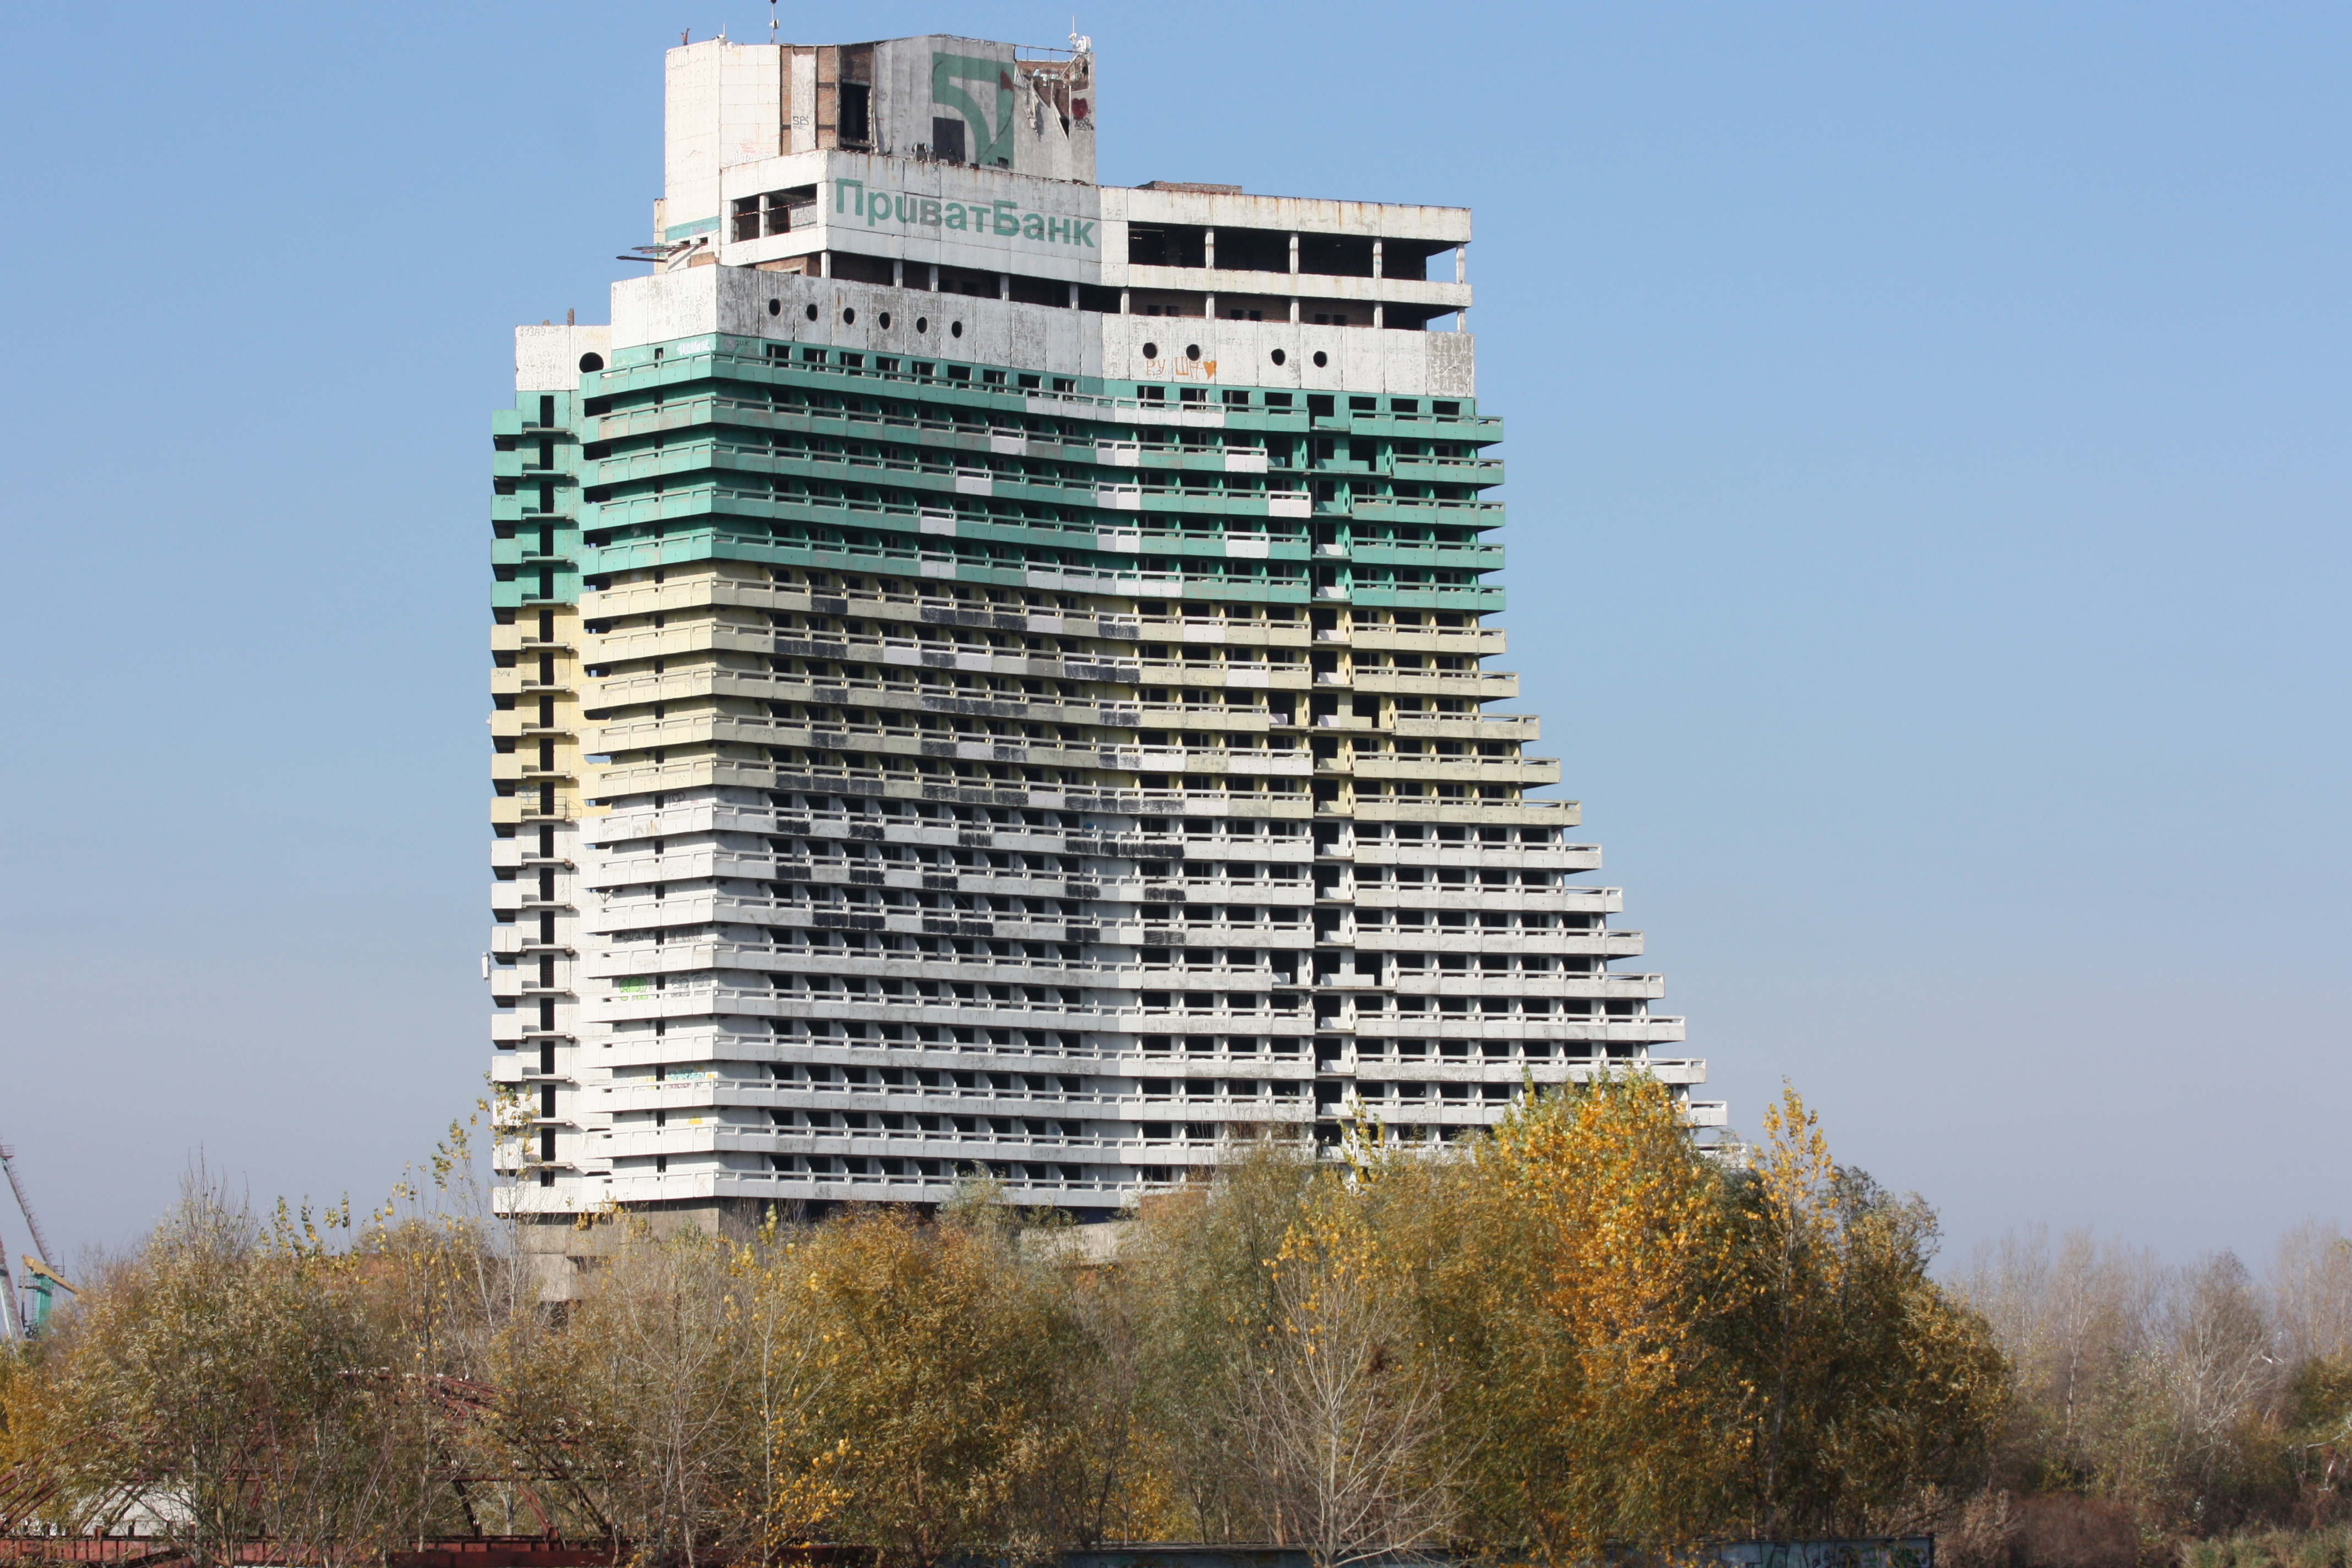 Parus building in Dnipropetrovsk. Construction began in 1973 and has never finished. (Photo credit: Graham Phillips)